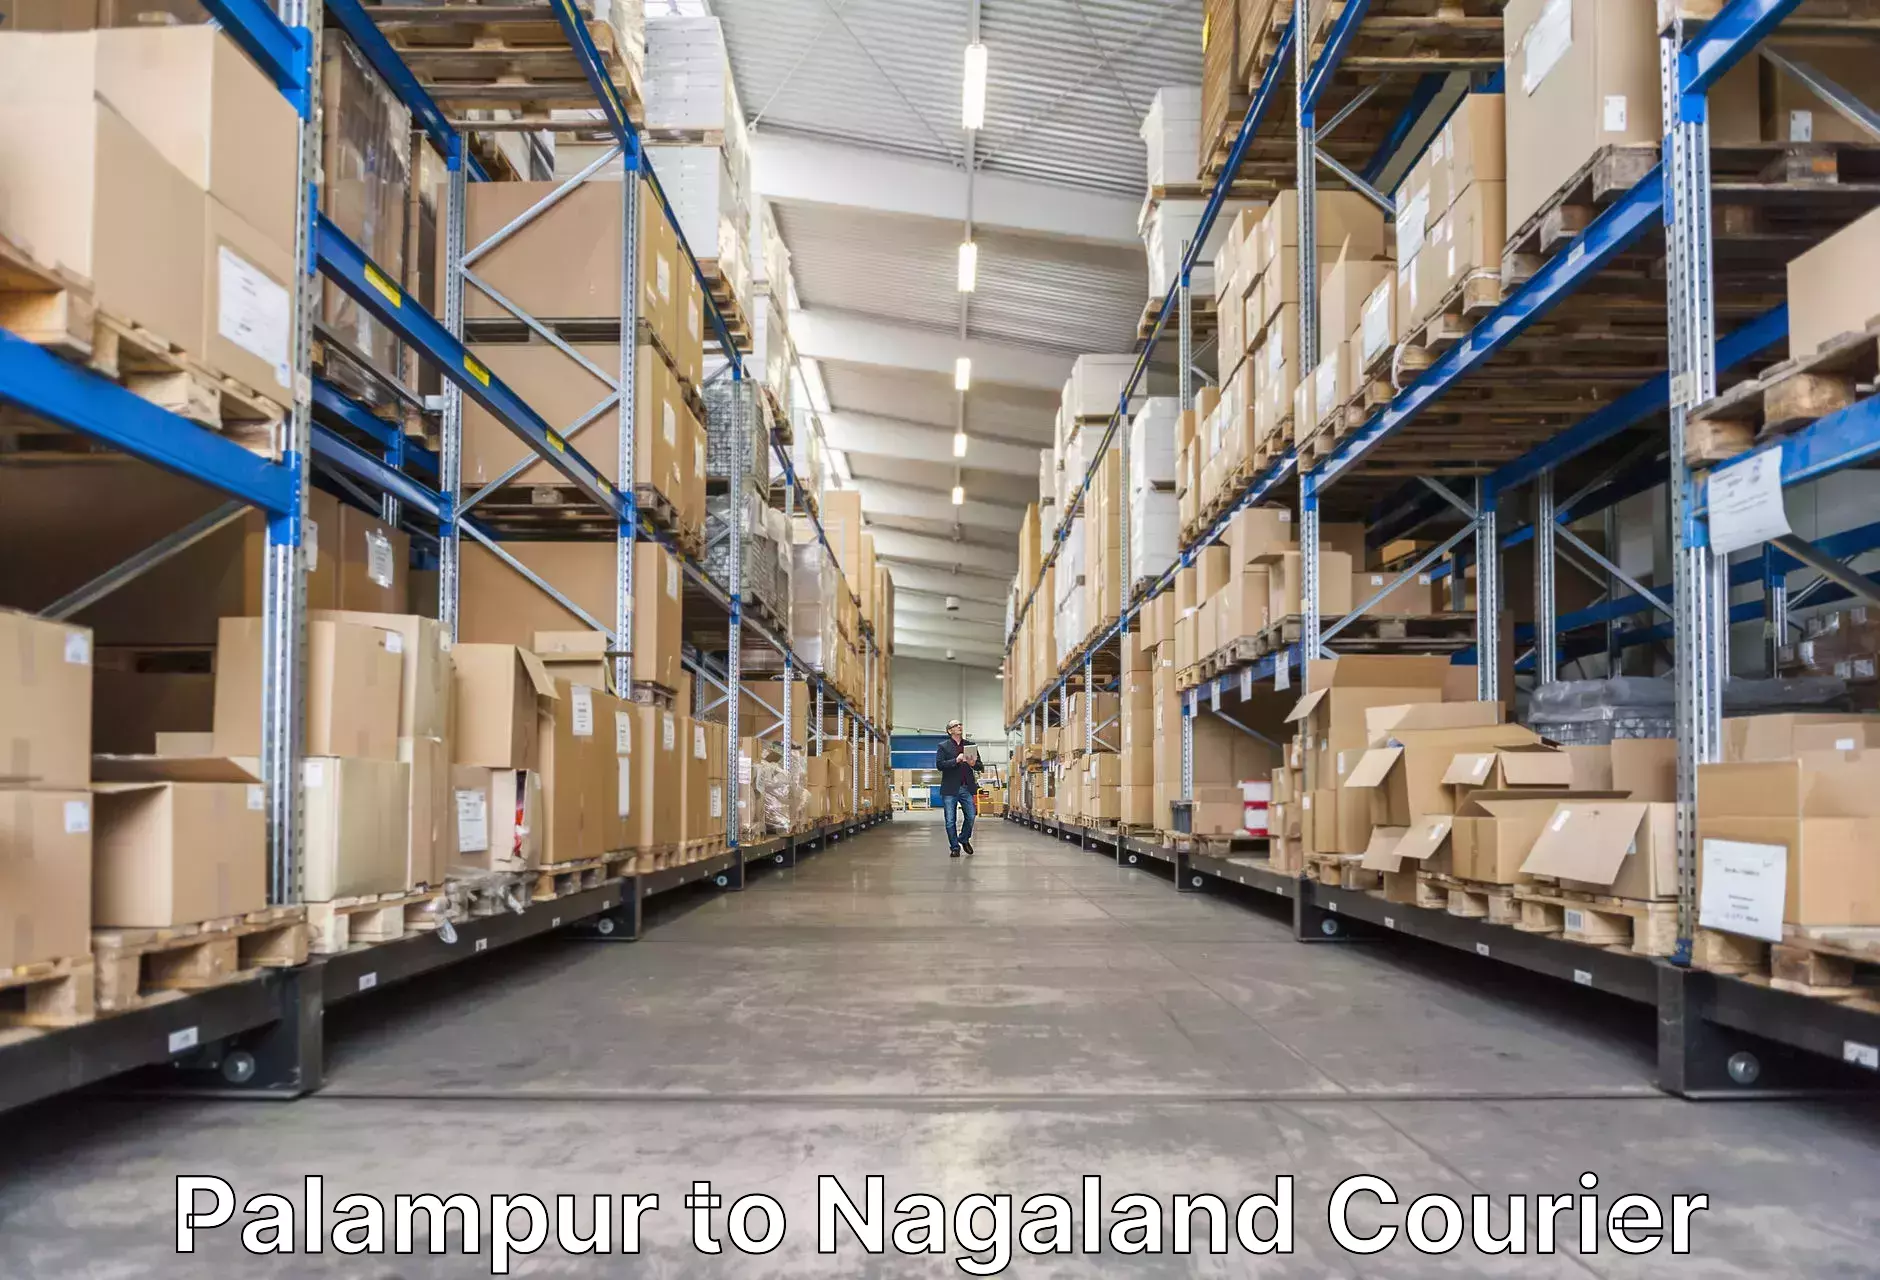 Luggage shipment specialists Palampur to Nagaland